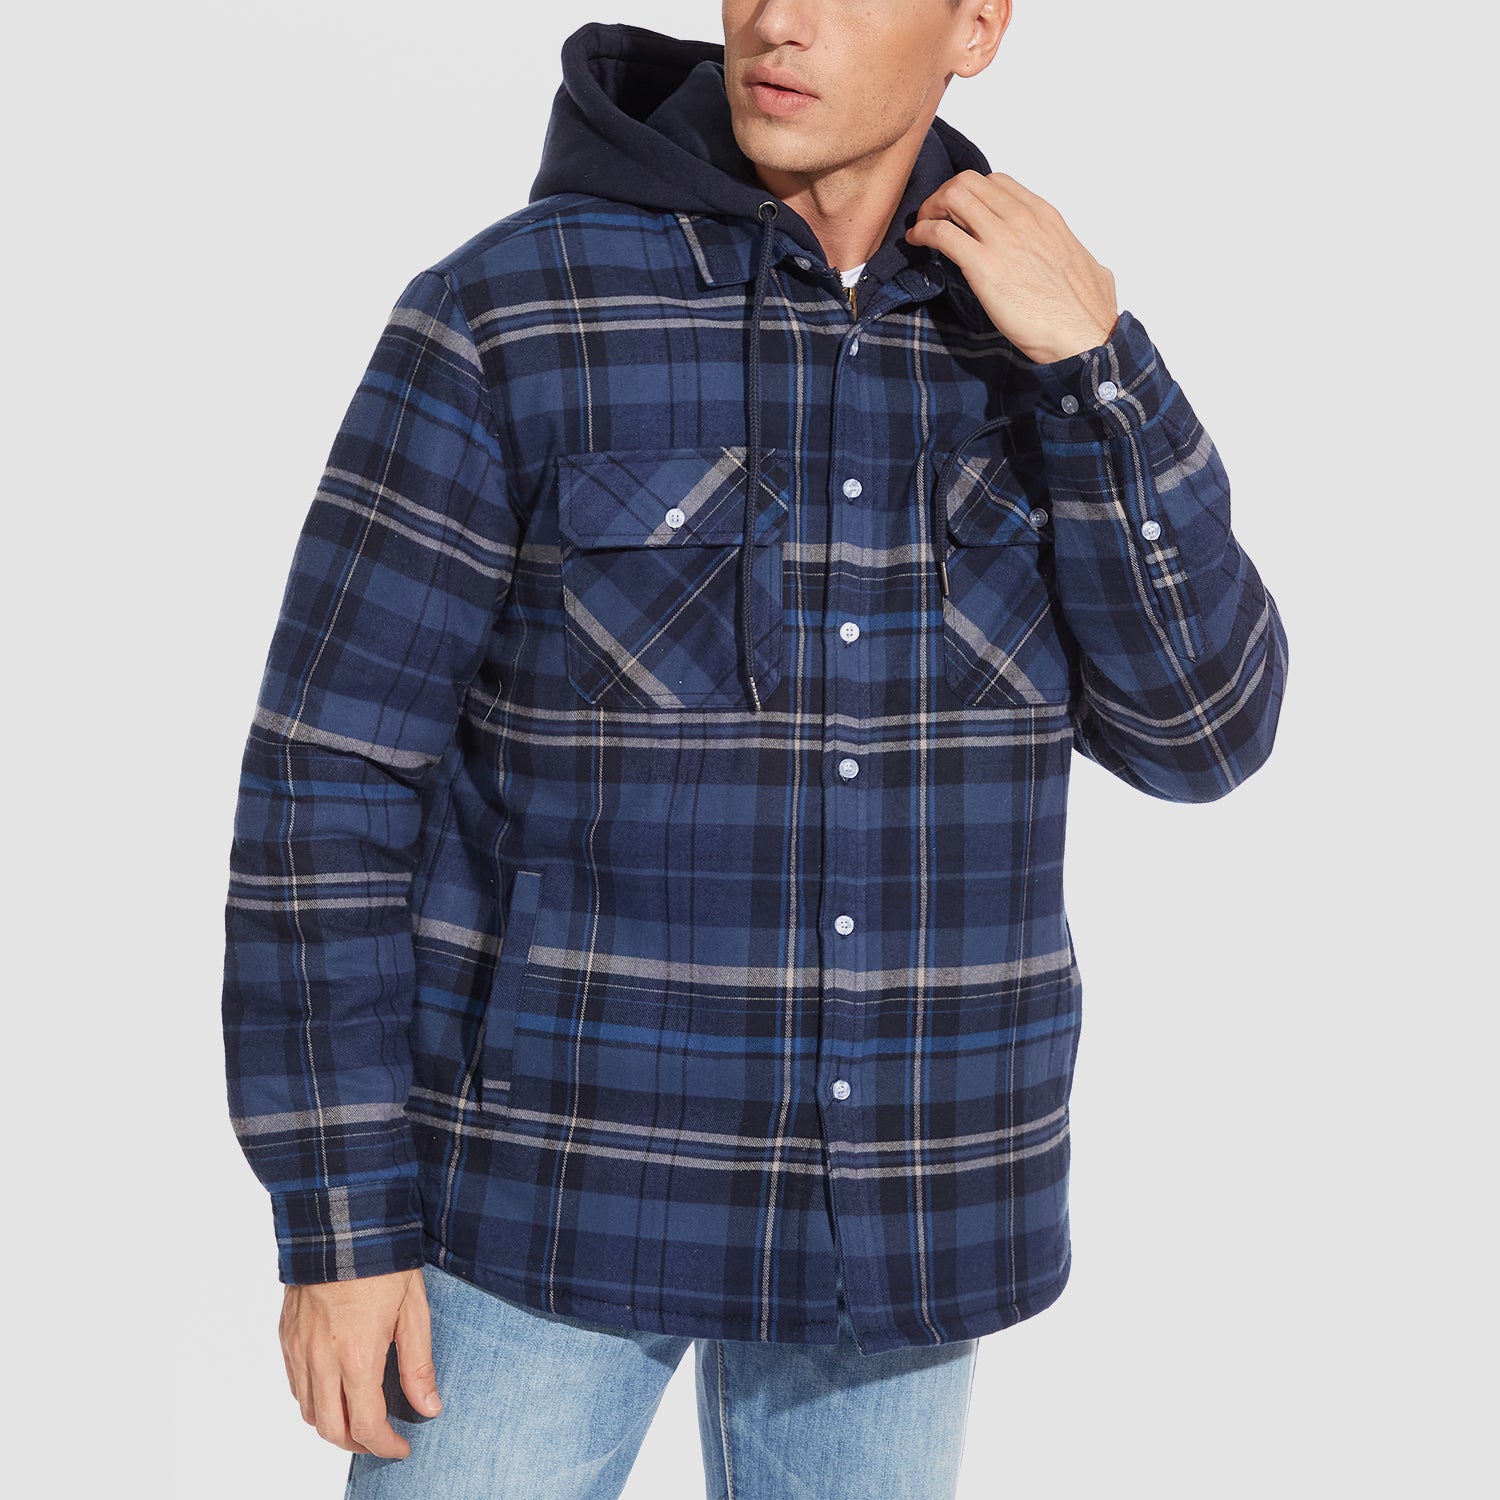 Men's Flannel Shirt Jacket | Thick Hoodie Outwear | MAGCOMSEN